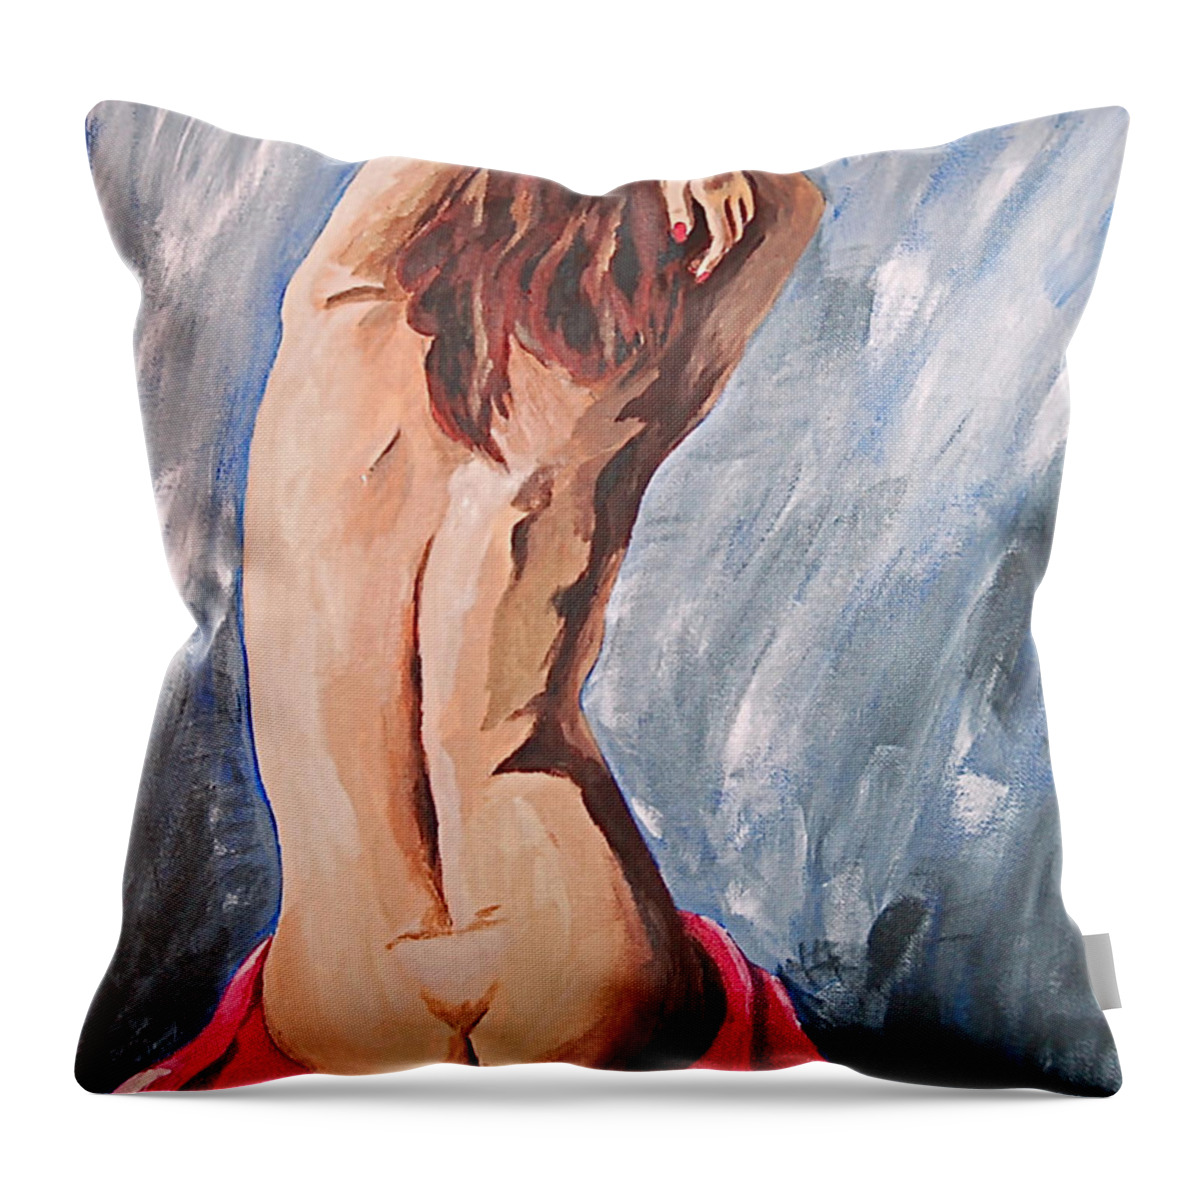 Nude Throw Pillow featuring the painting Morning Light 2 by Herschel Fall